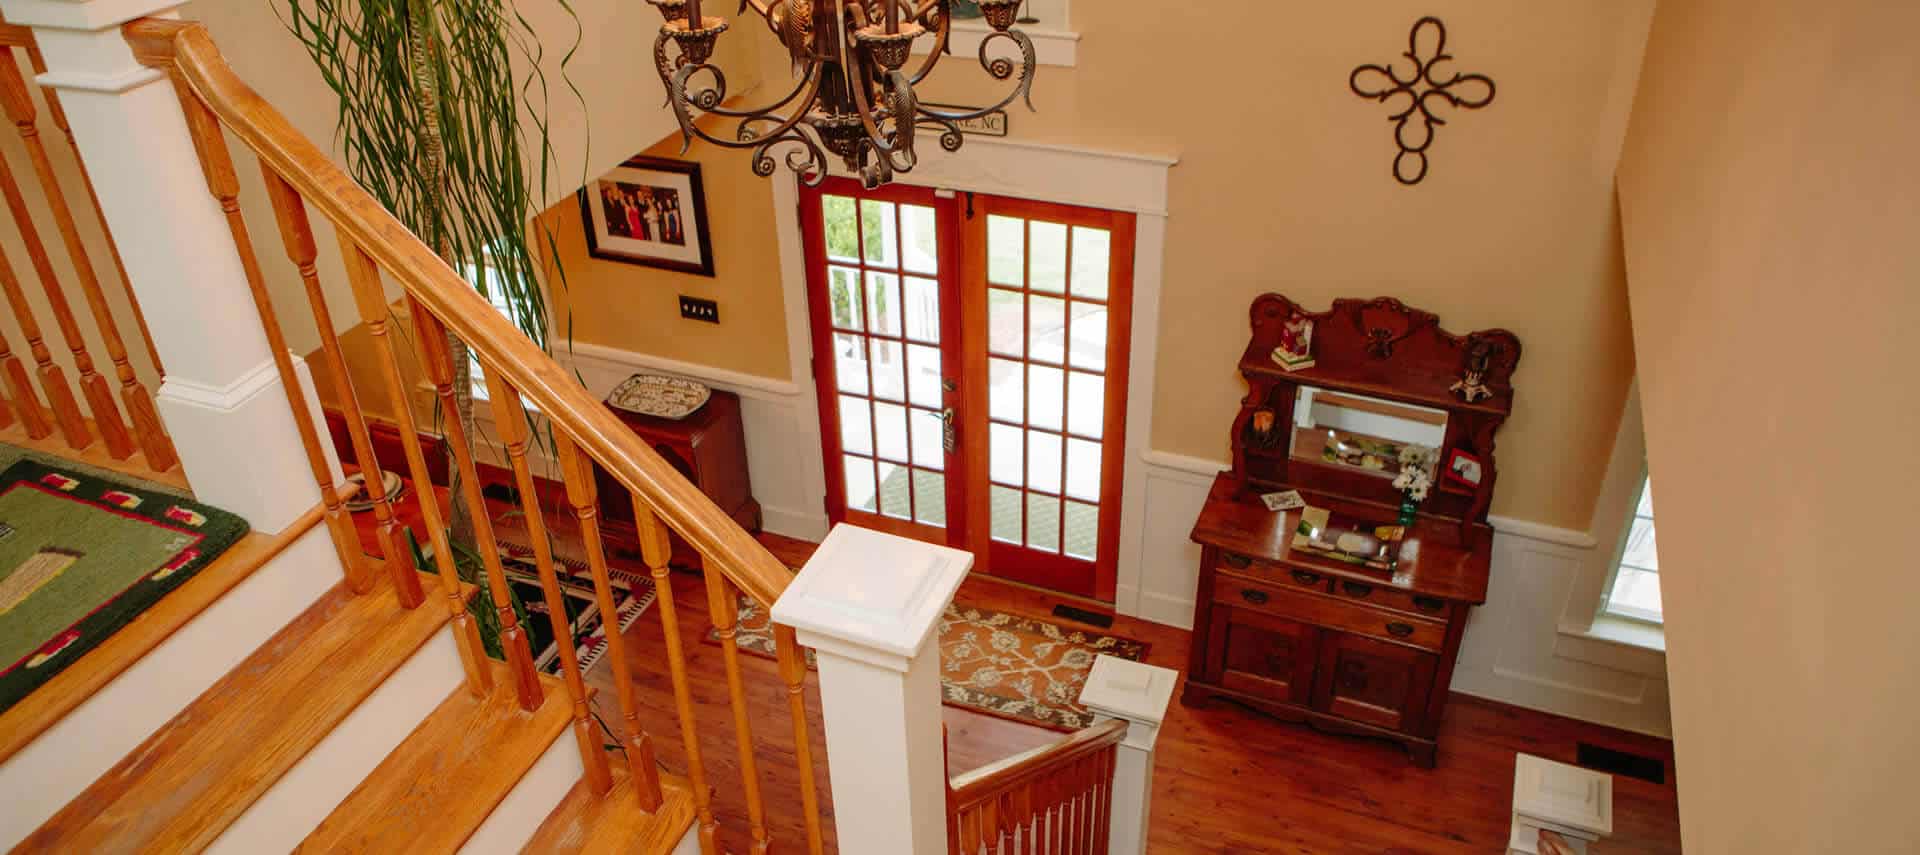 View of foyer from staircase landing - wooden floors, wooden star rails and an antique dresser.